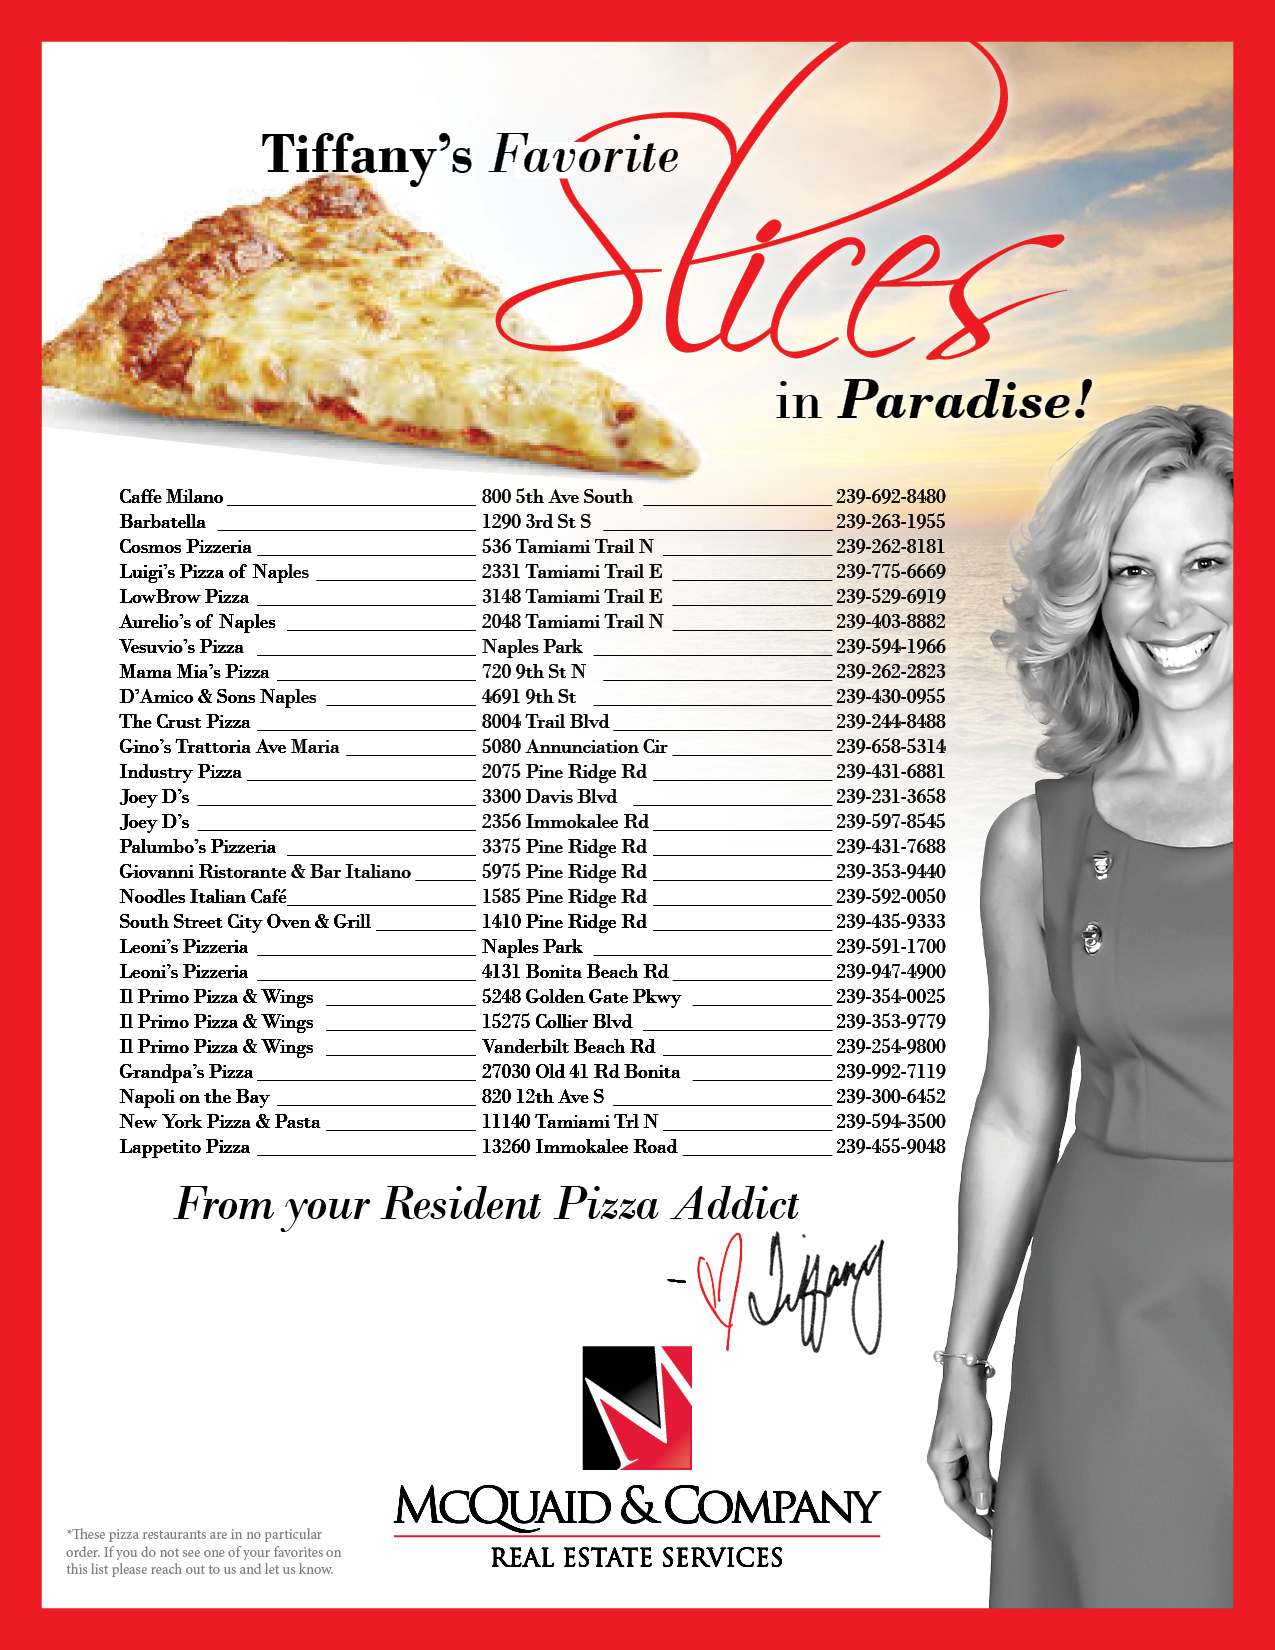 Tiffany's Favorite Slices in Paradise!